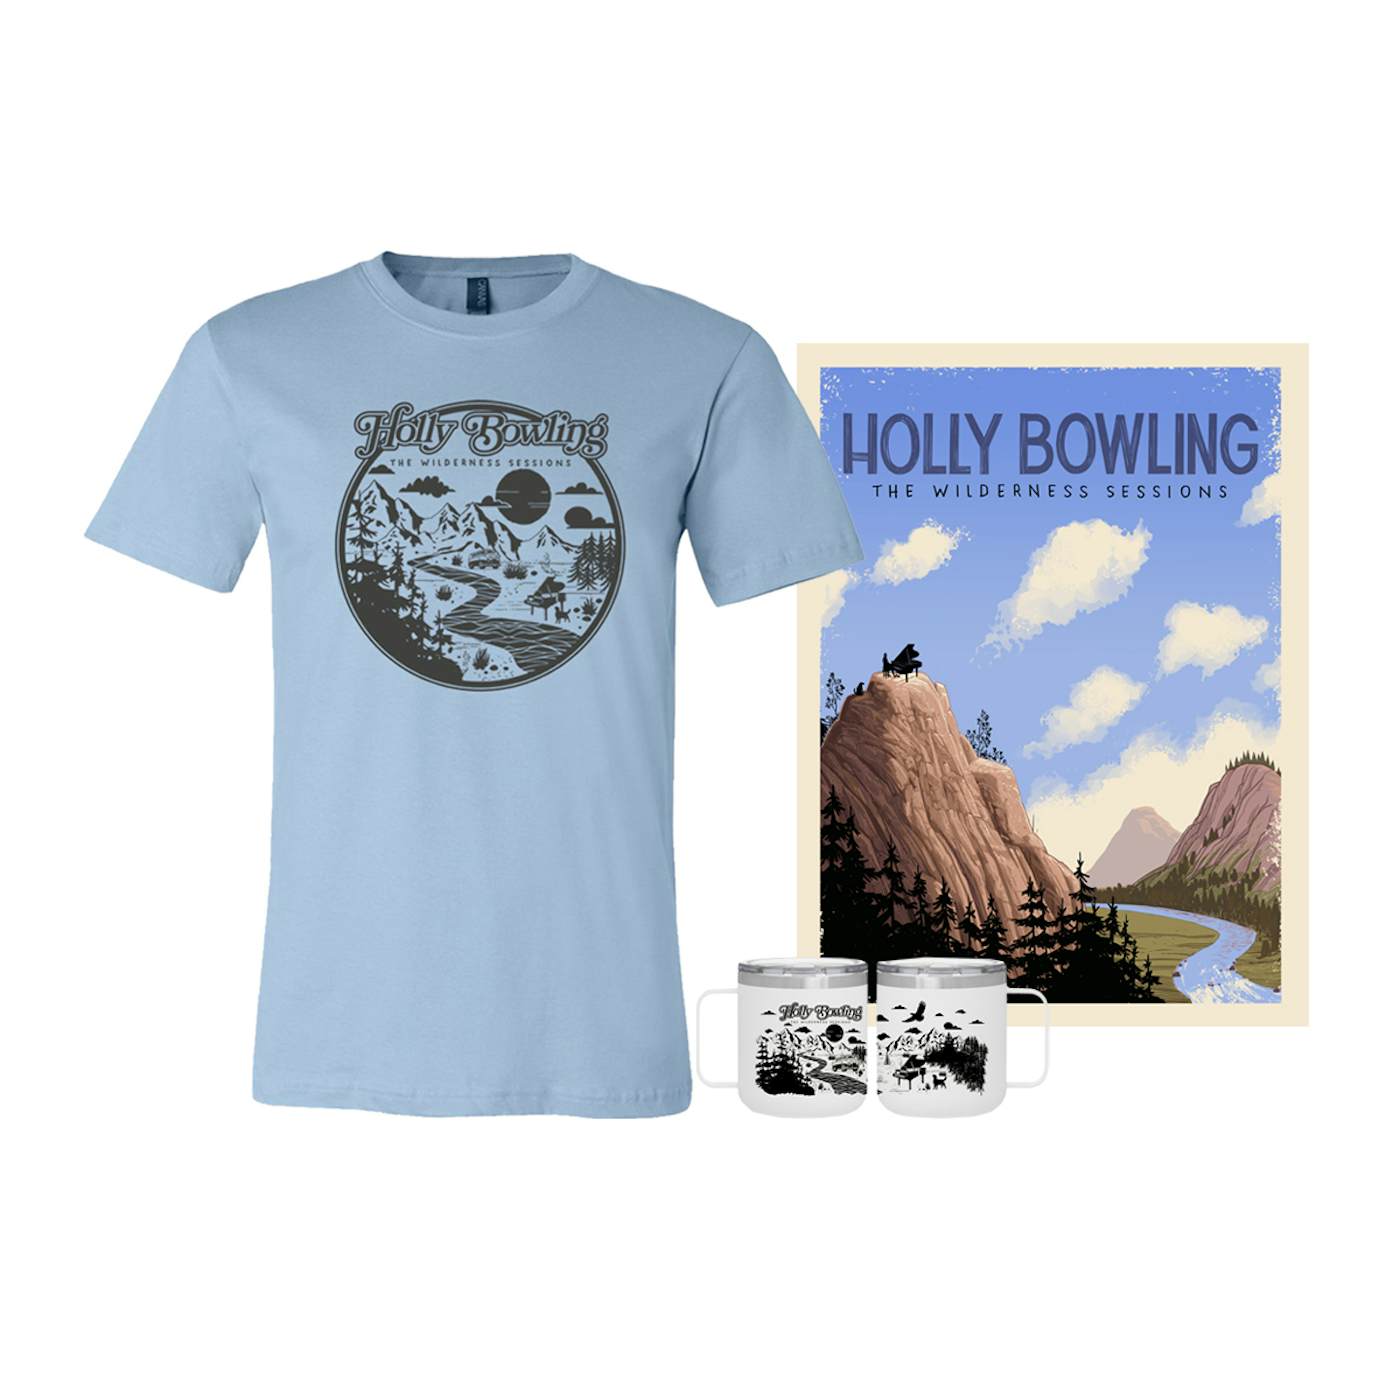 Holly Bowling VIP Canyon Package (Blue) - Only 50 Available